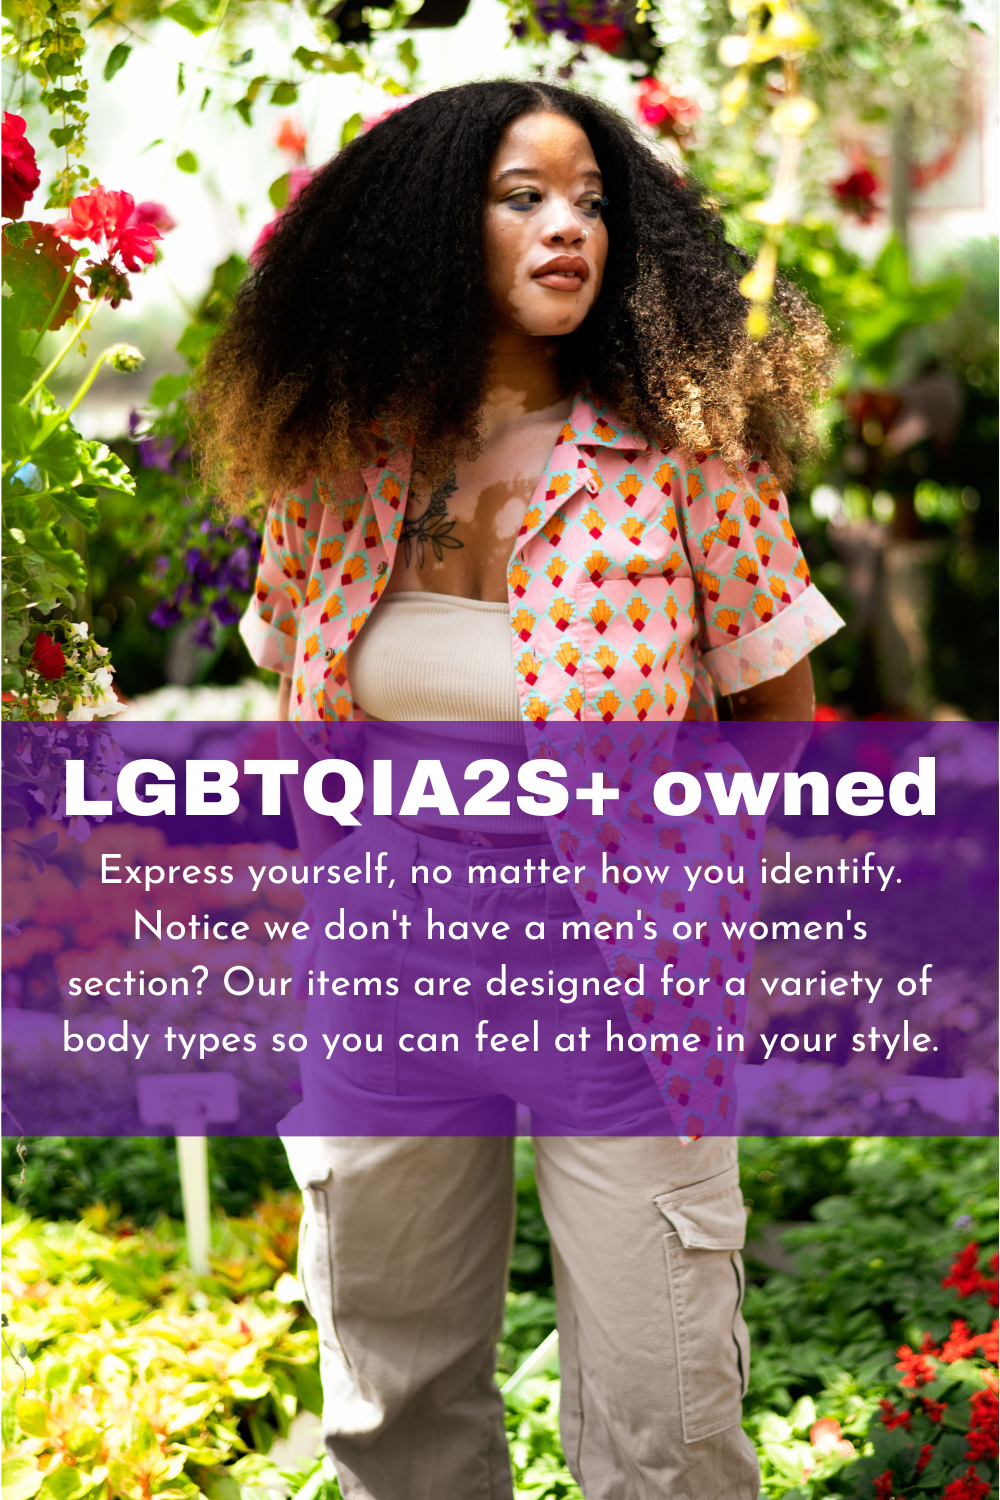 LGBTQIA2S+ owned. Express yourself, no matter how you identify. Notice we don't have a men's or women's section? Our items are designed for a variety of body types so you can feel at home in your style.